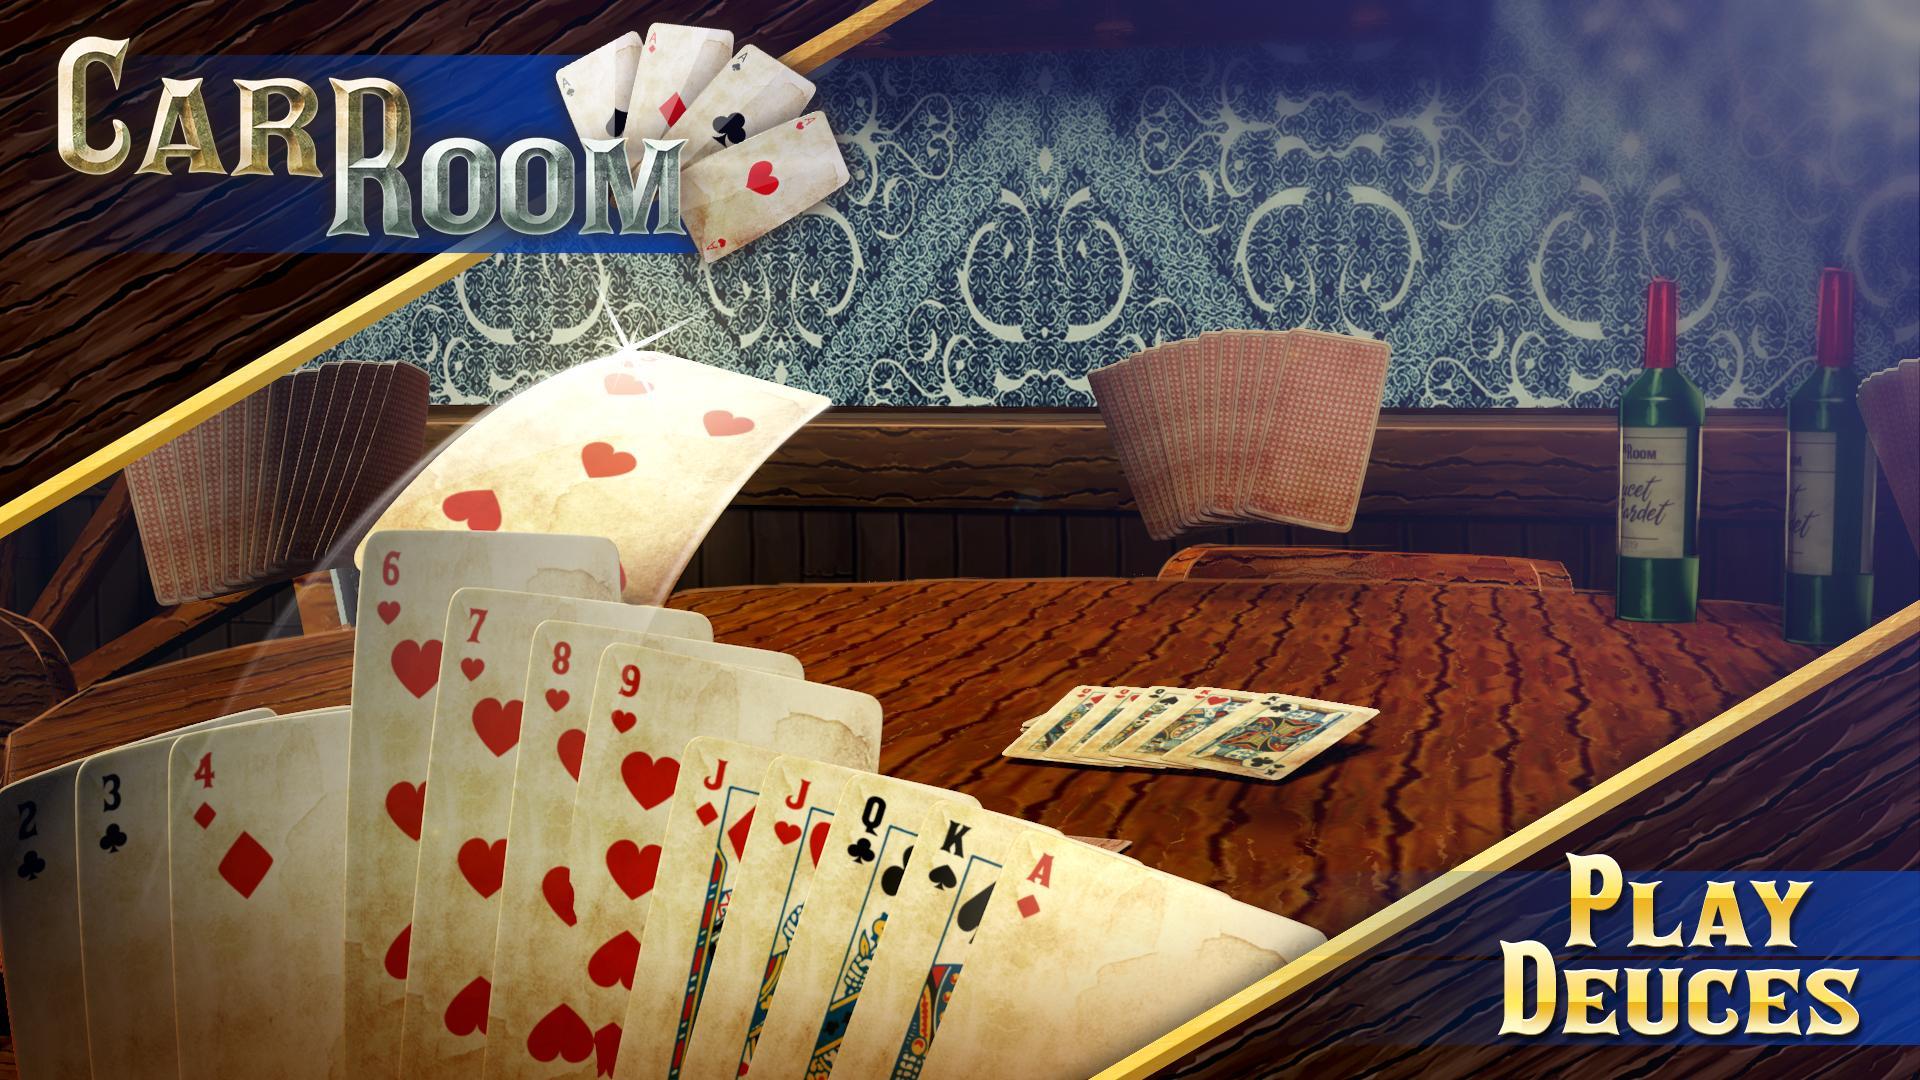 Card rooms. Rooms Cards. Card Room novel.